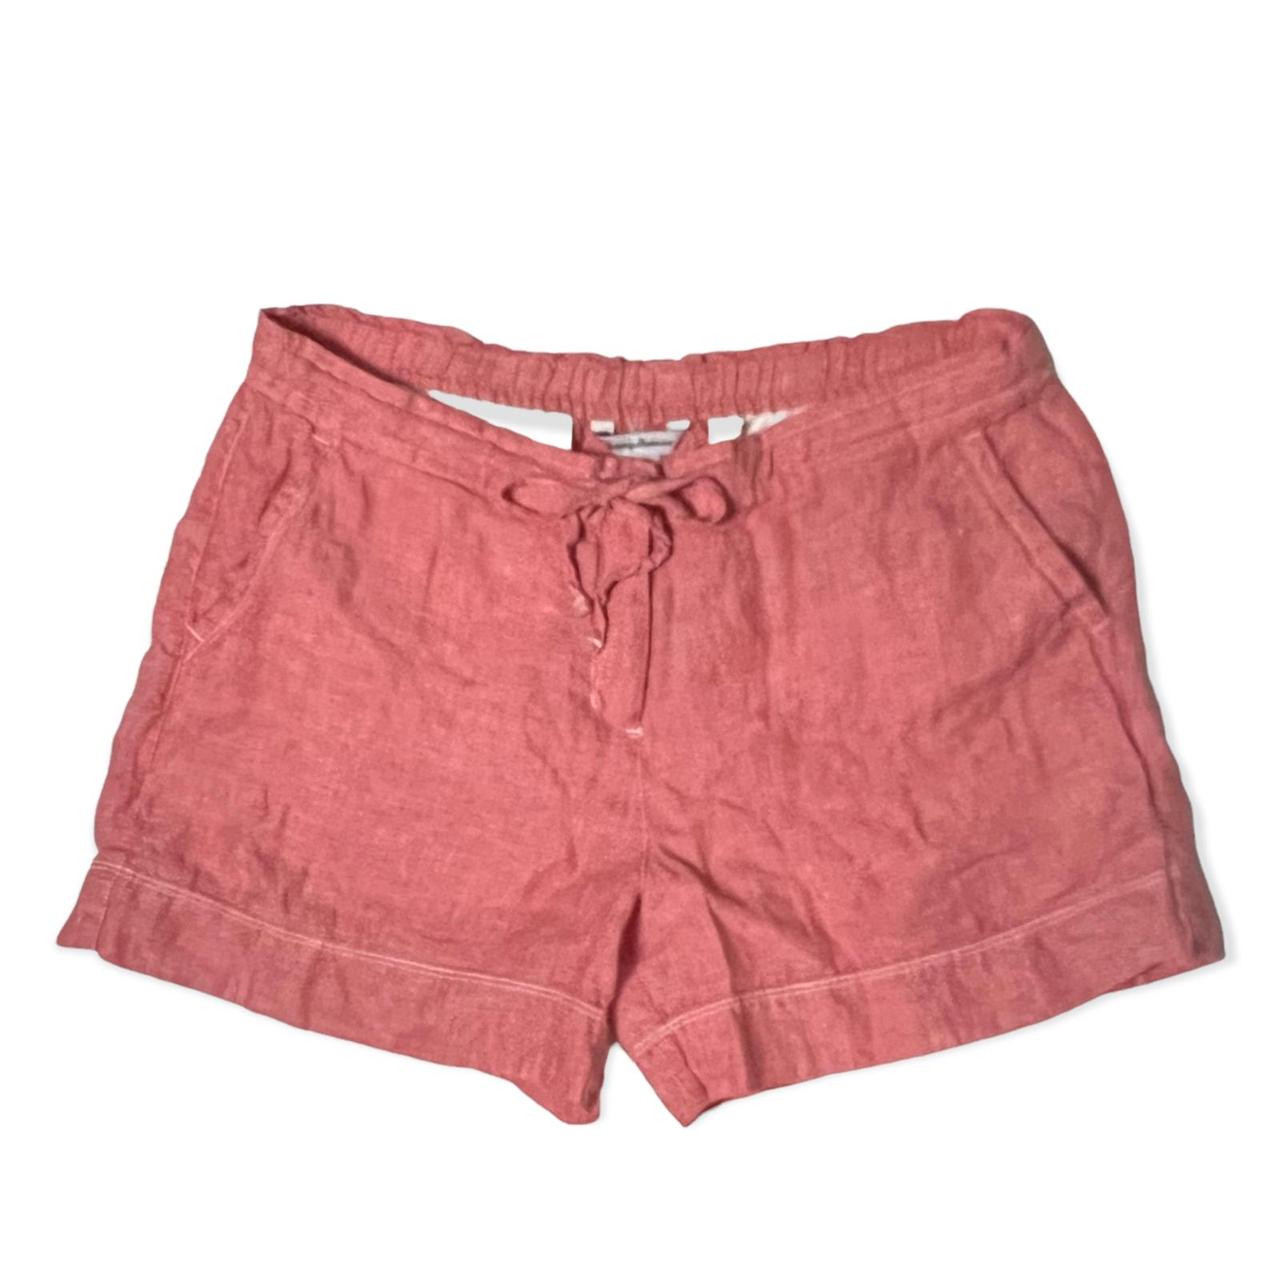 Product Image 1 - Tommy Bahama Women's Coral High-Waist